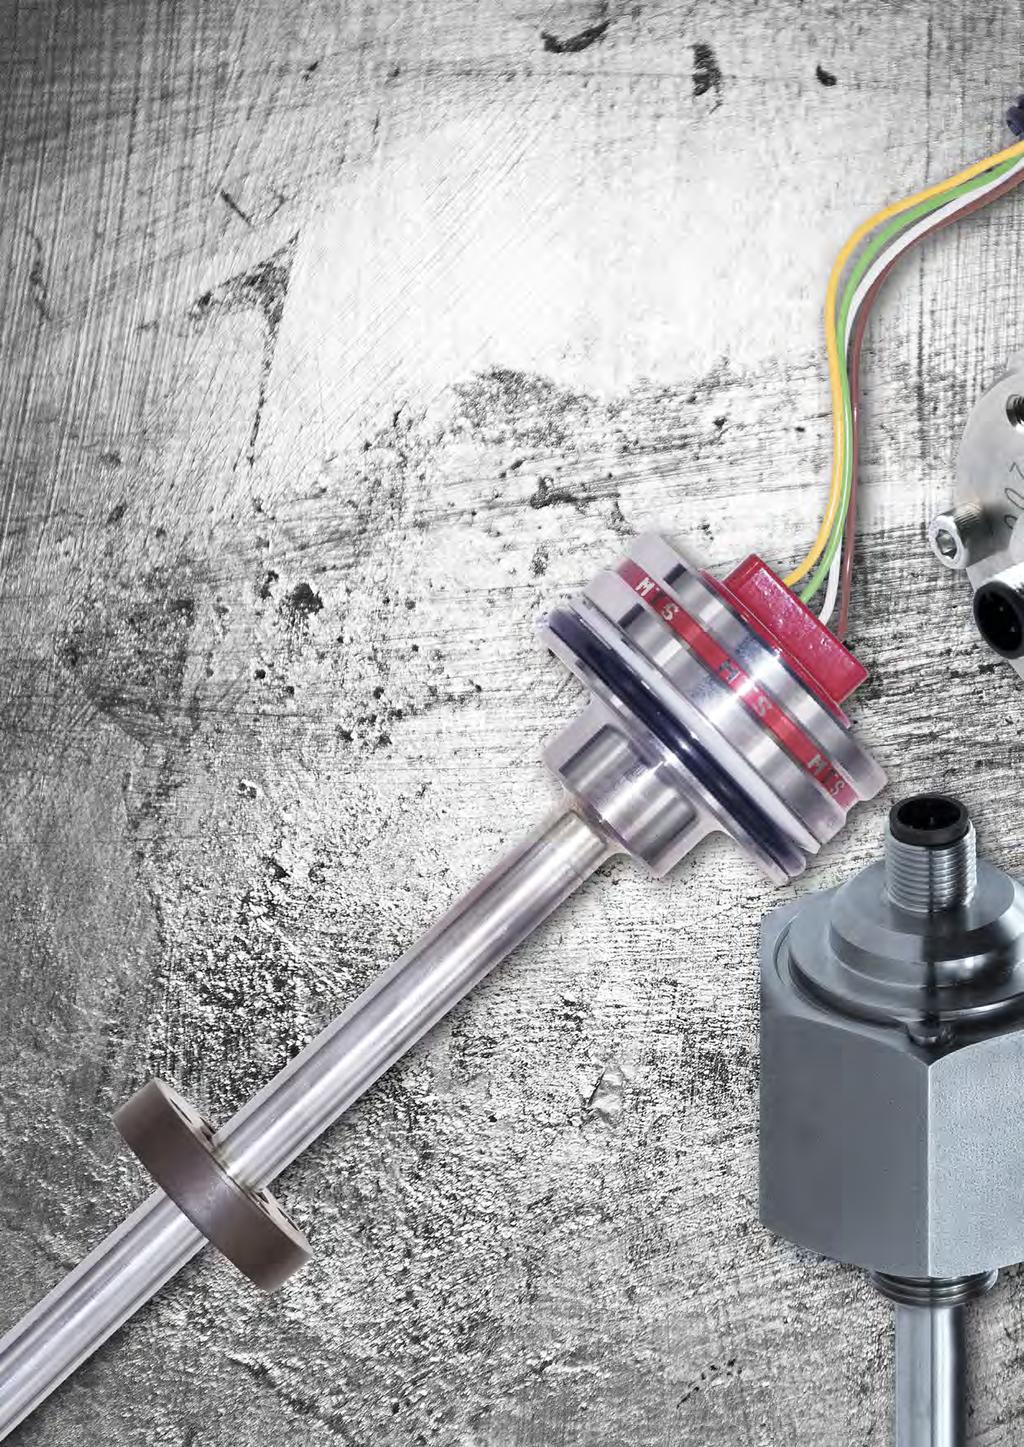 MH-SERIES MH The Temposonics MH-Series sensors are specifically designed for direct stroke measurement in hydraulic cylinders.